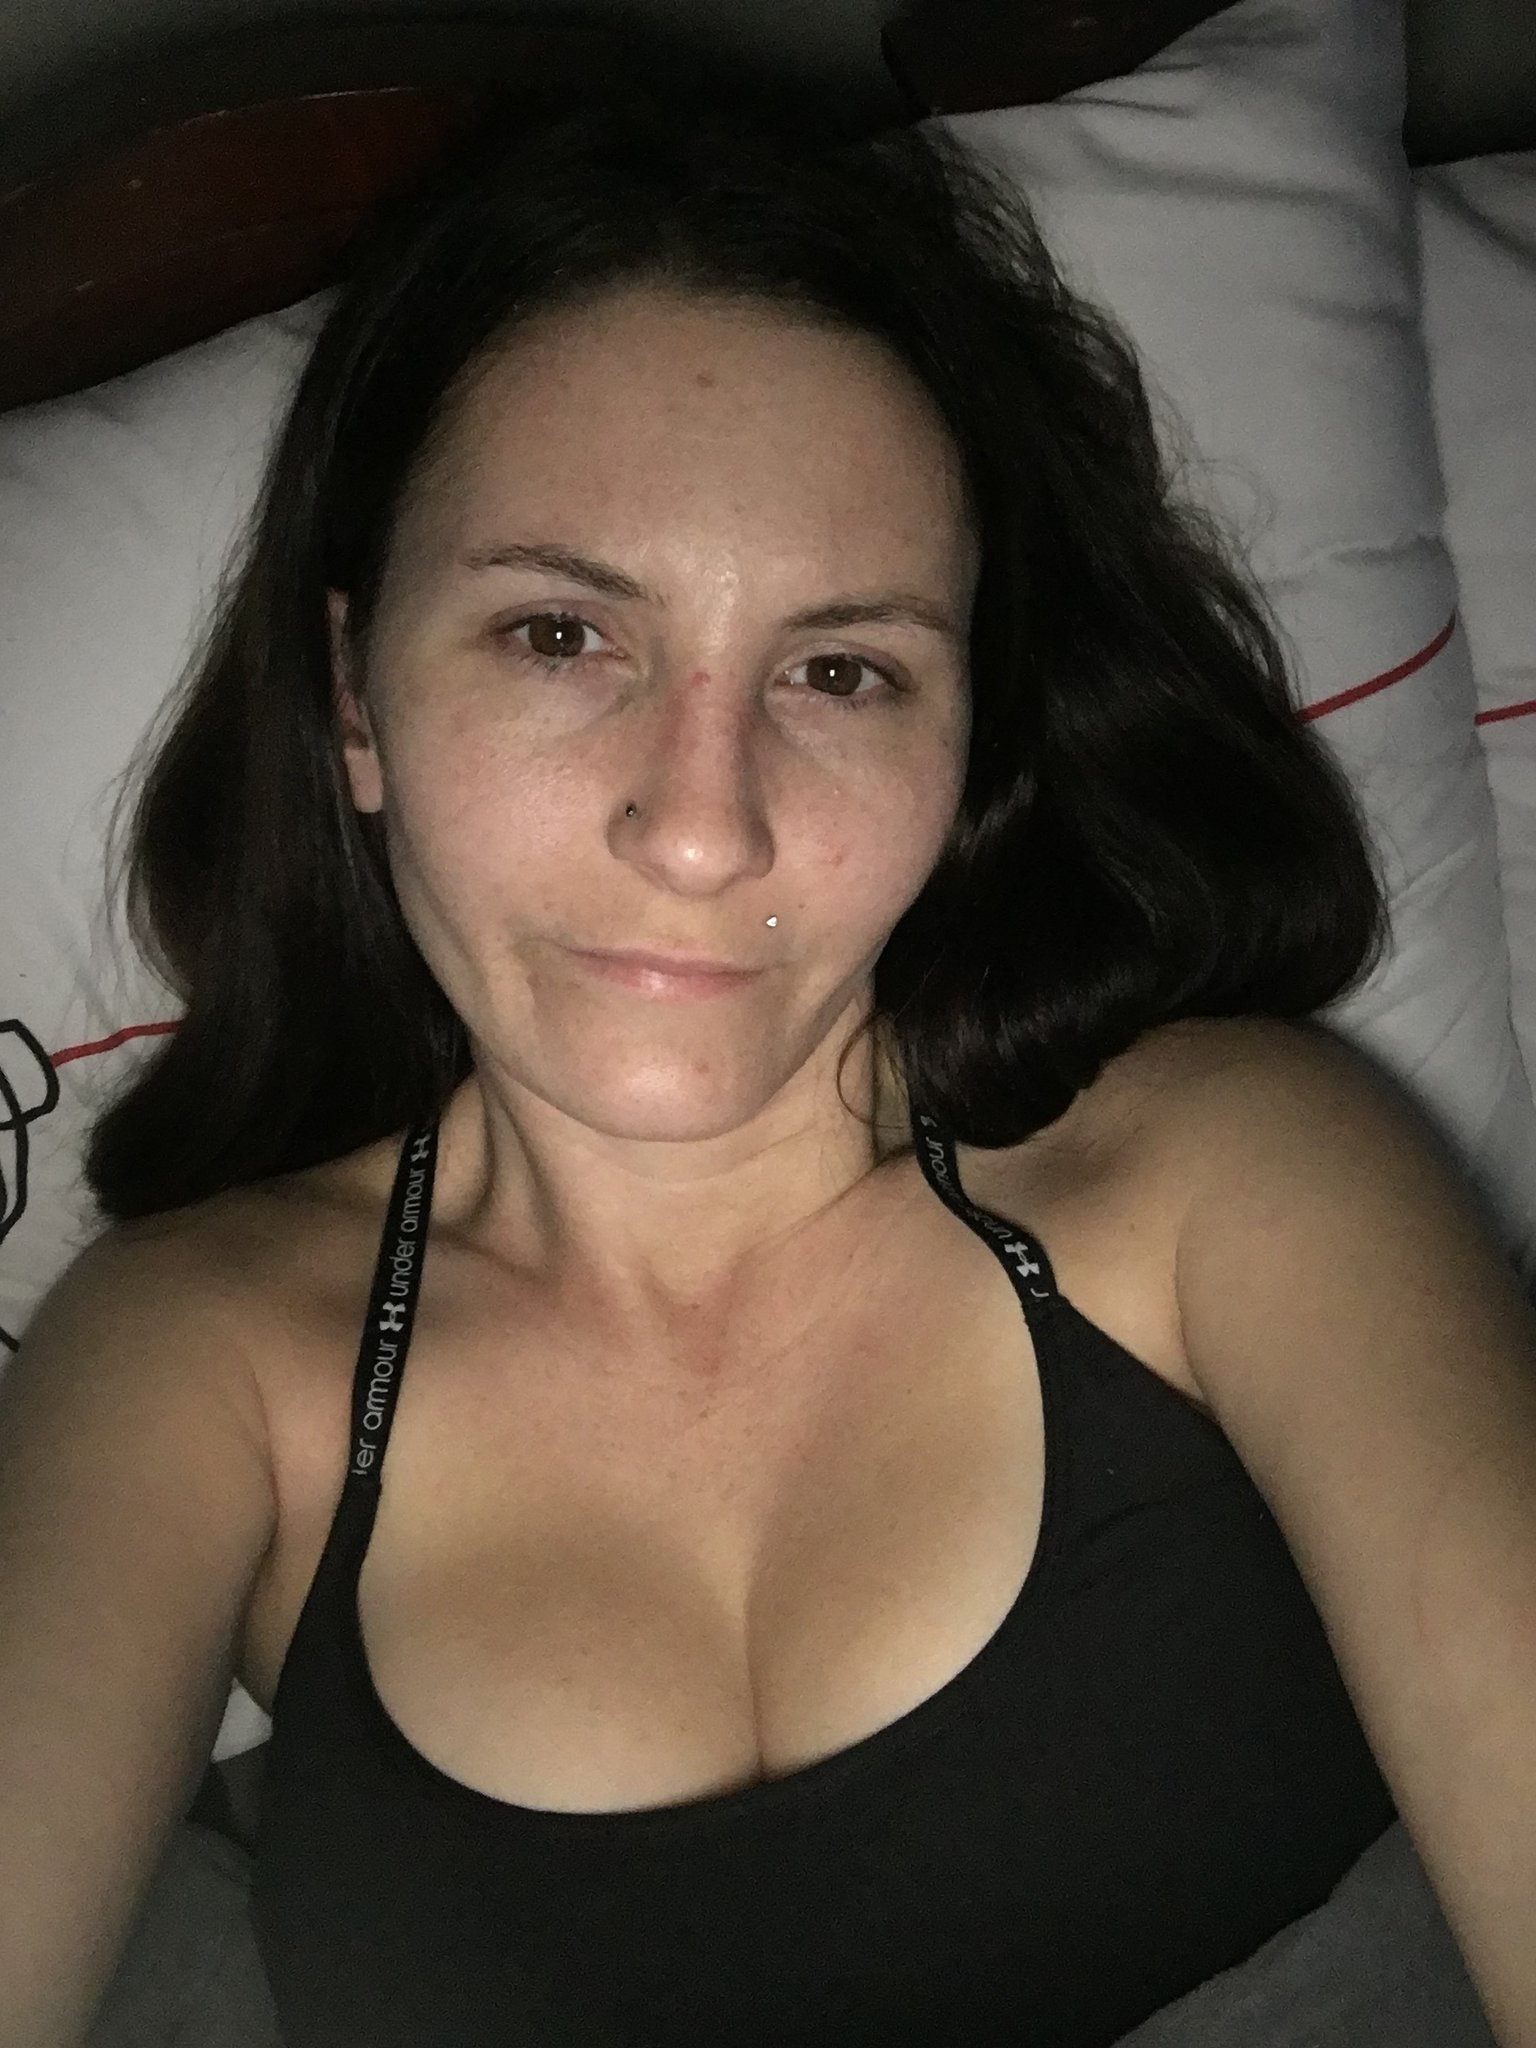 JessieL on X: @zayhilfiger Good morning lovelies. This beds so cold and  empty. t.coxu5OVIYnch #hotmom #onlyfansbabe #onlyfansgirl #amateur  #hotwife #sexywife #sexymom #milf #homemade t.coTC6qZyh1Dv  X